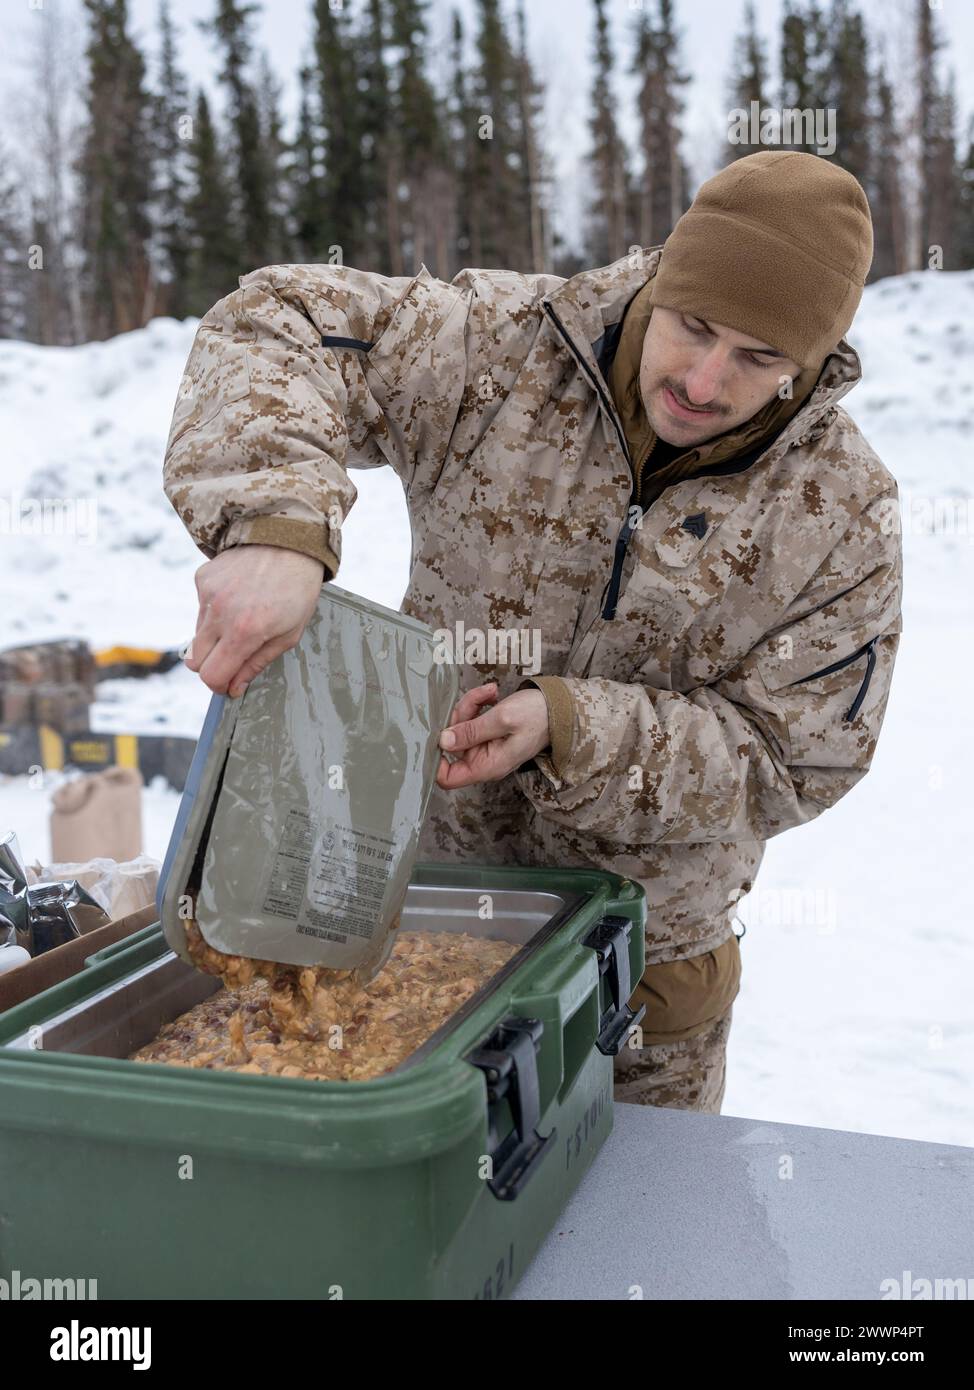 U.S. Marine Corps Sgt. Andrew Wood, a food service specialist with Fox Battery, 2nd Battalion, 14th Marine Regiment, 4th Marine Division, Marine Forces Reserve prepares chow for Marines in support of exercise Arctic Edge 2024 (AE24) on Eielson Air Force Base, Alaska, Feb. 23, 2024. Wood served as the only food service specialist for the duration of the exercise. AE24 is a U.S. Northern Command-led homeland defense exercise demonstrating the U.S. military’s capabilities in extreme cold weather, joint force readiness, and U.S. military commitment to mutual strategic security interests in the arc Stock Photo